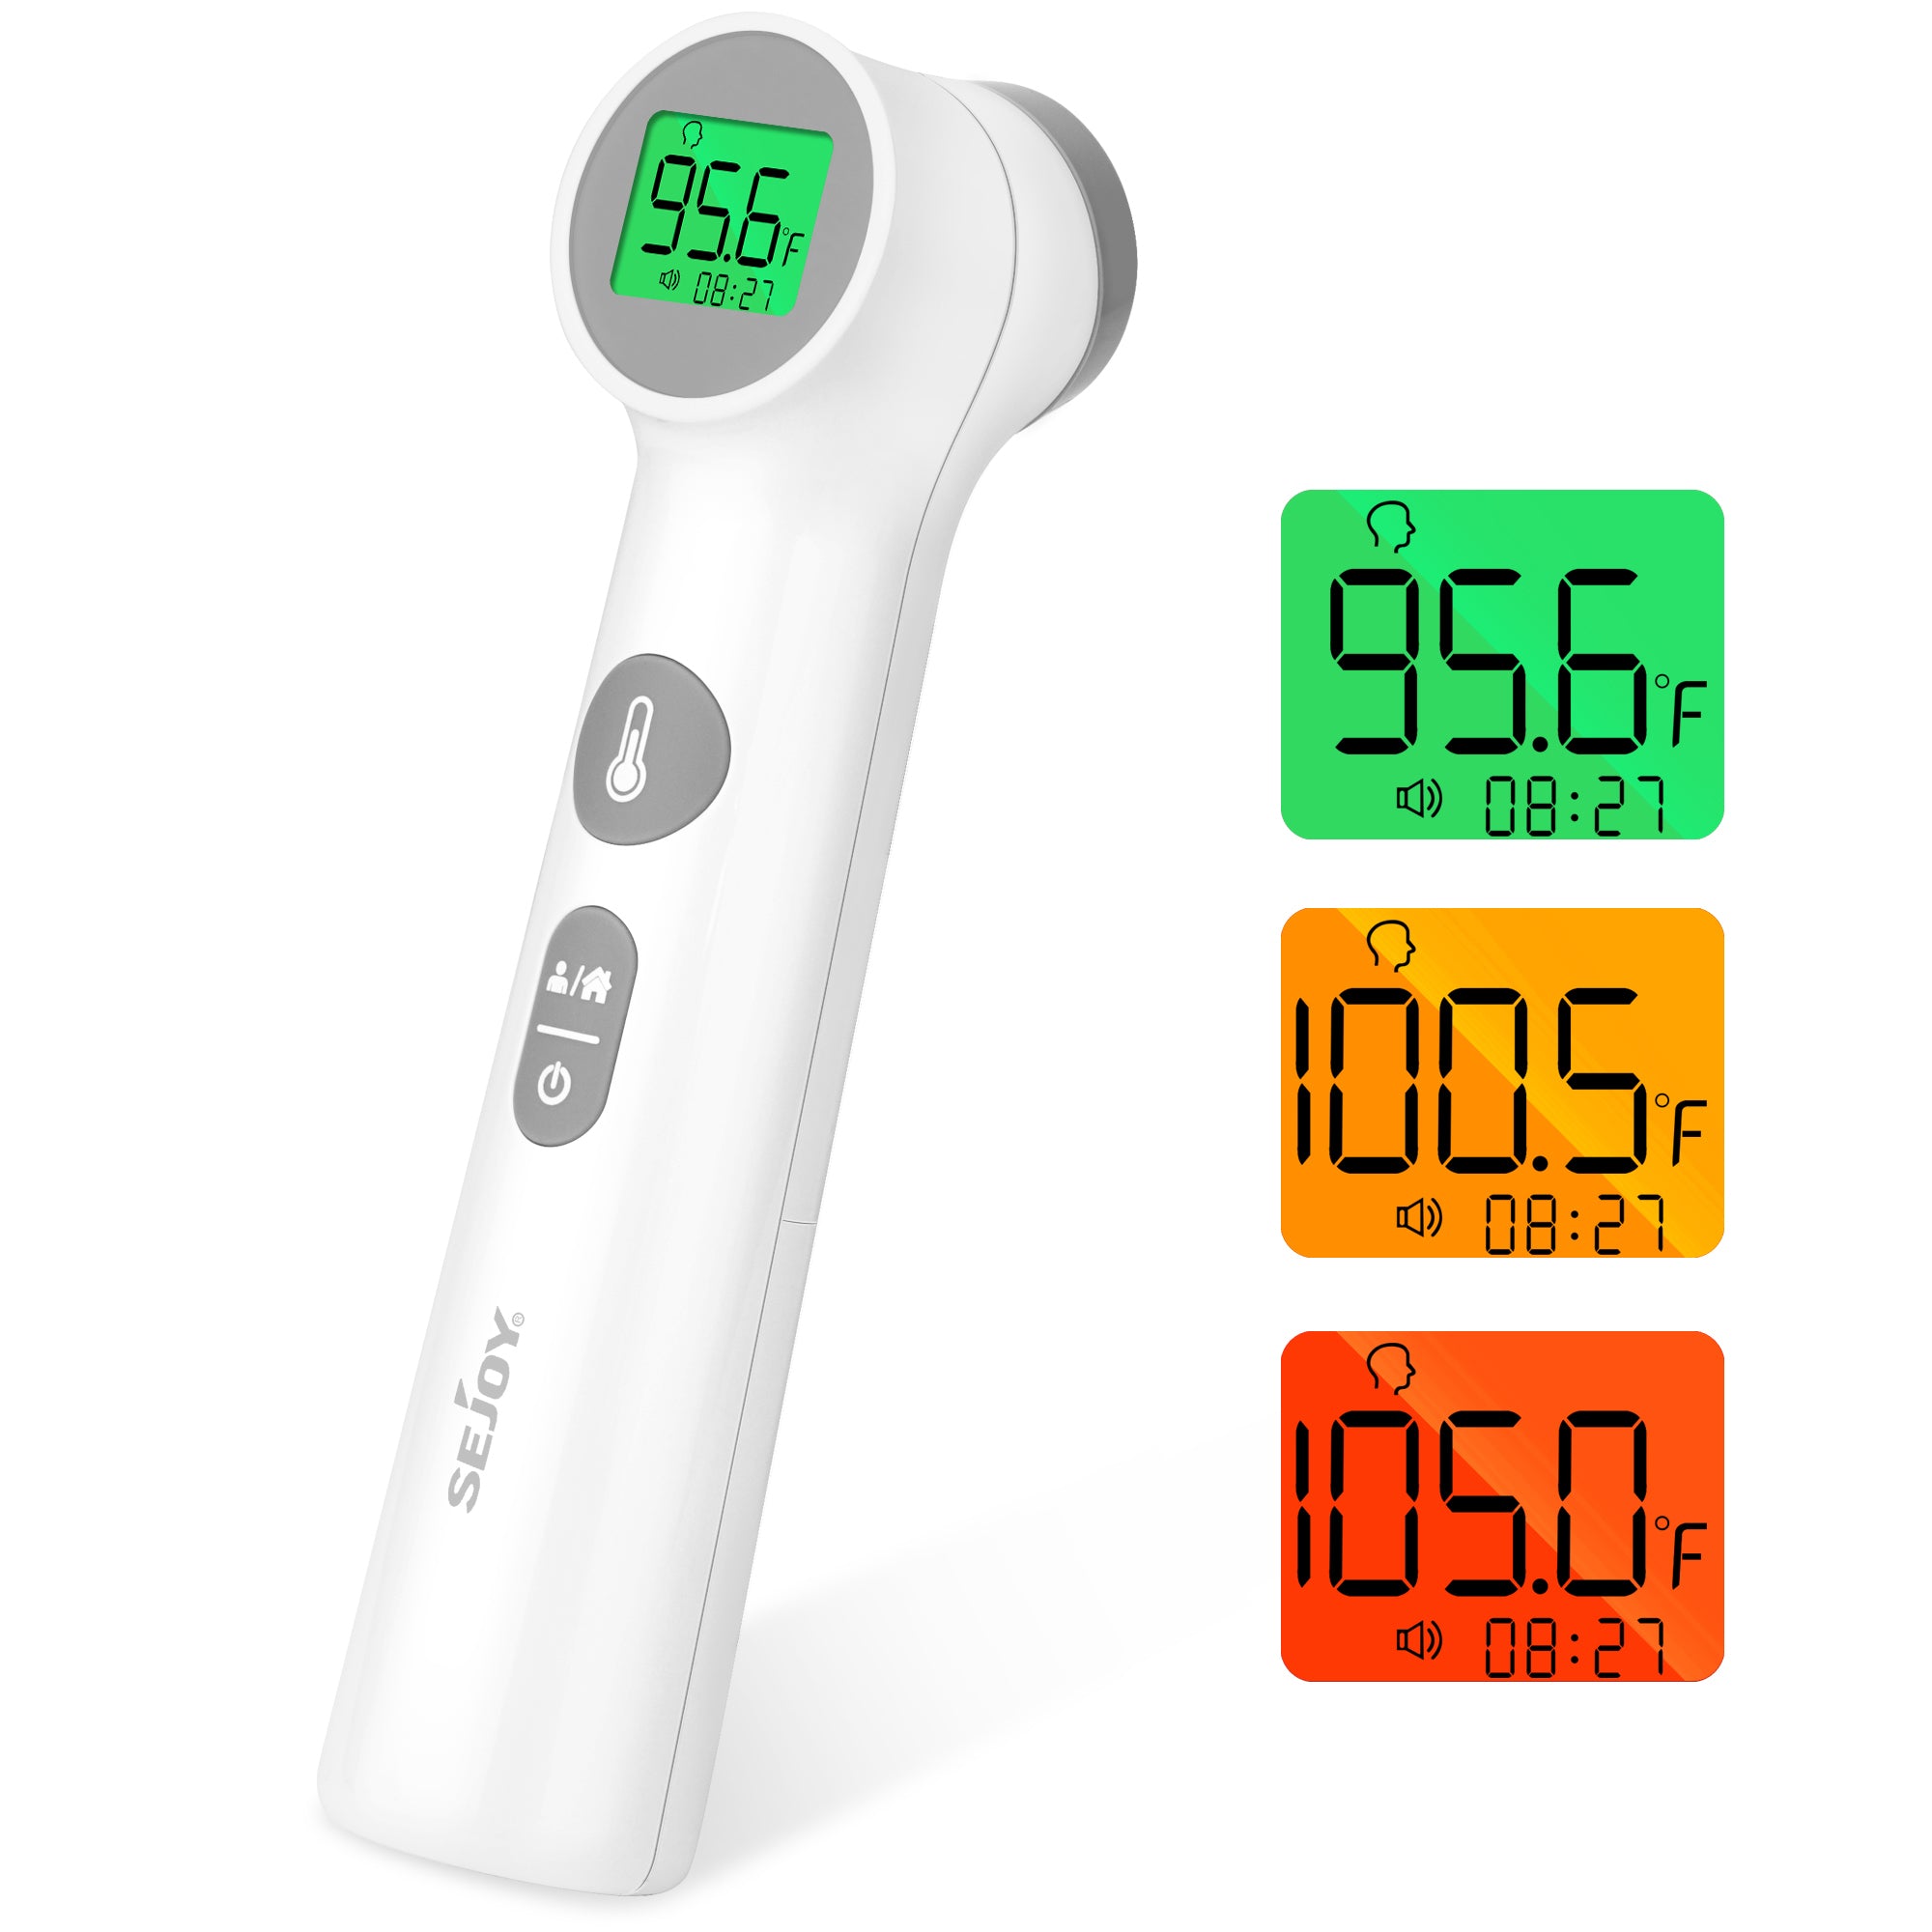 Just Point Infrared Thermometer - SoapEquipment